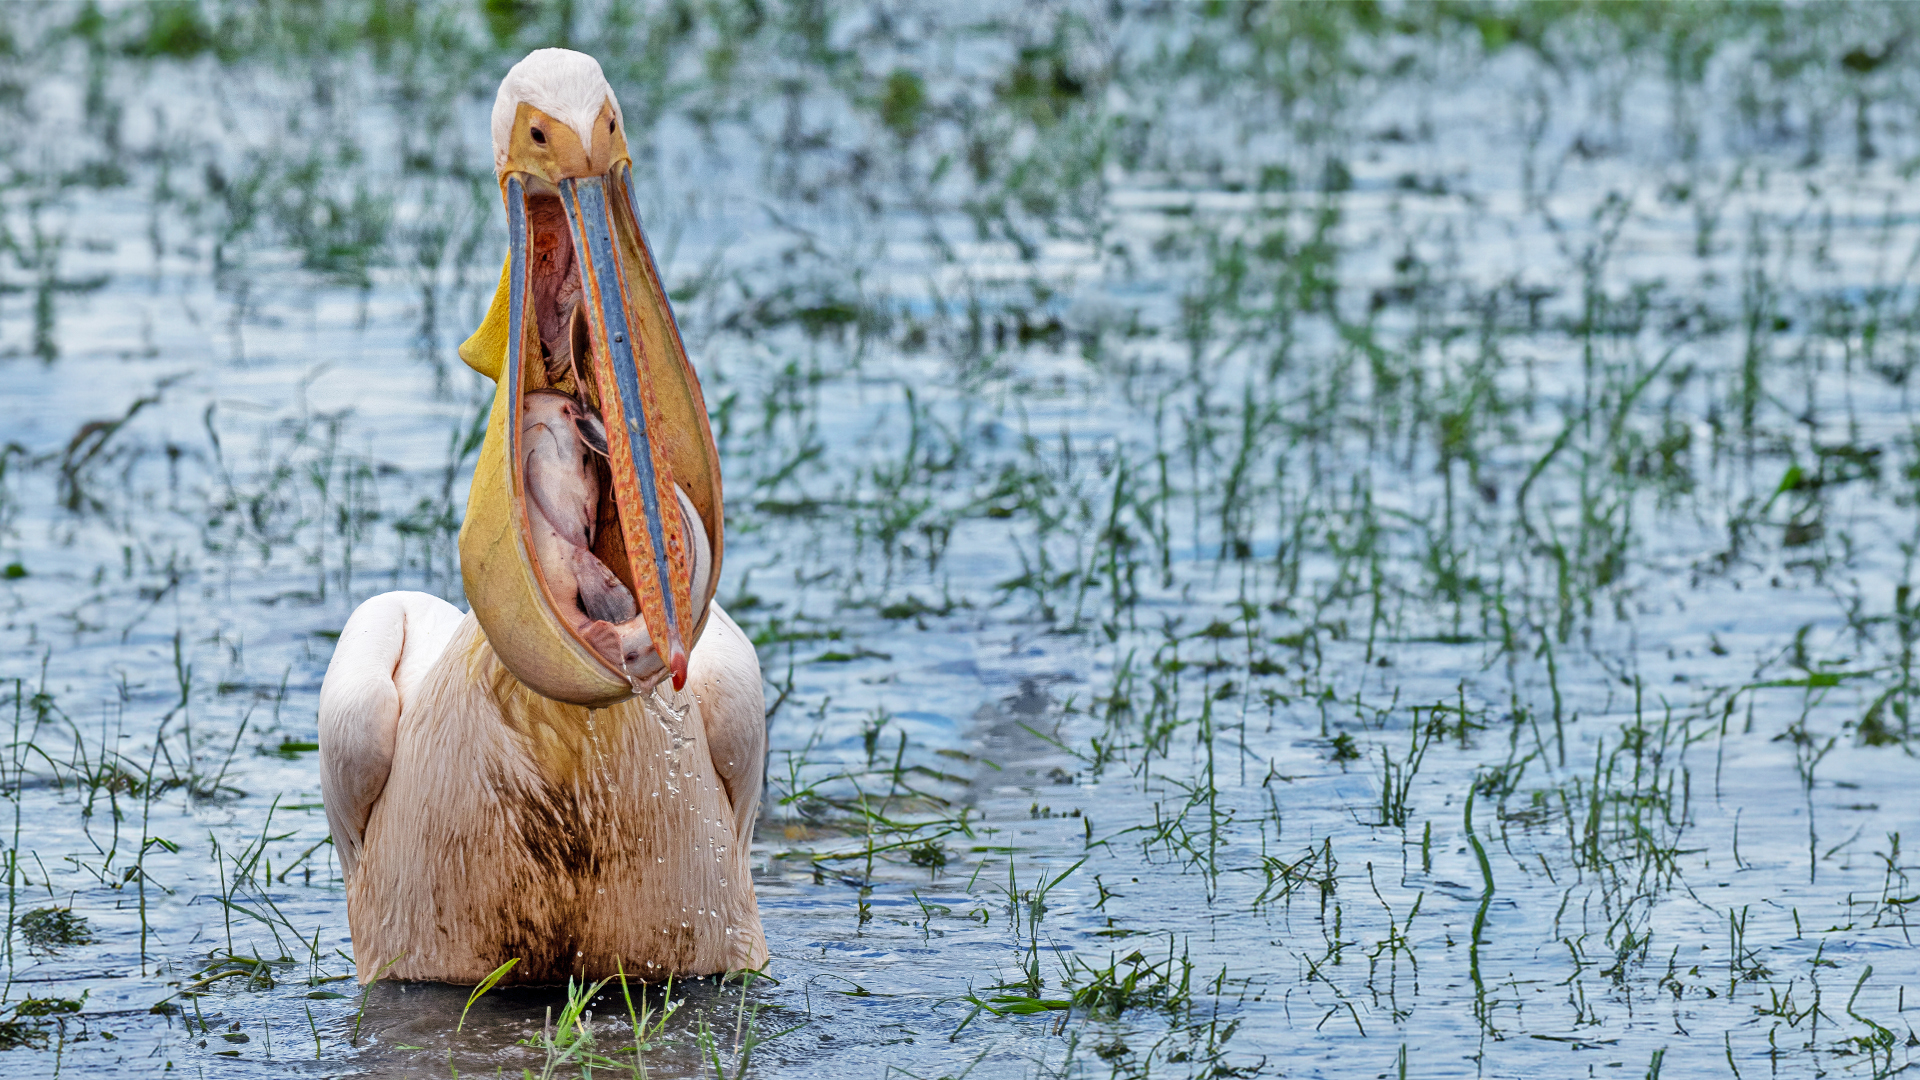 Catfish Fights for Its Life Inside Pelican’s Throat Before Being Swallowed